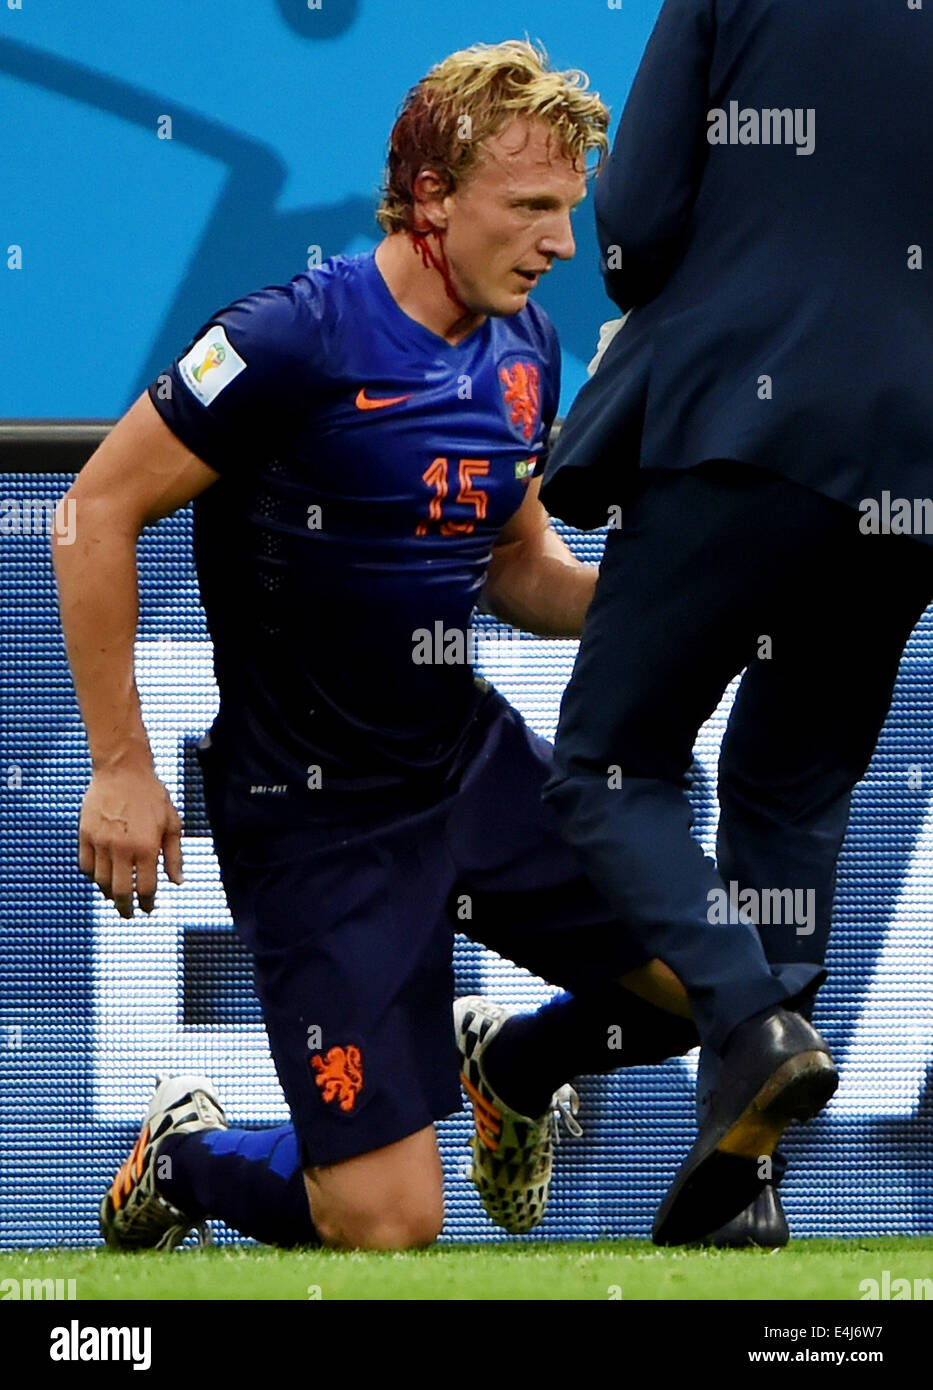 Brasilia, Brazil. 12th July, 2014. Netherlands' Dirk Kuyt bleeds during the third place play-off match between Brazil and Netherlands of 2014 FIFA World Cup at the Estadio Nacional Stadium in Brasilia, Brazil, on July 12, 2014. Credit:  Guo Yong/Xinhua/Alamy Live News Stock Photo